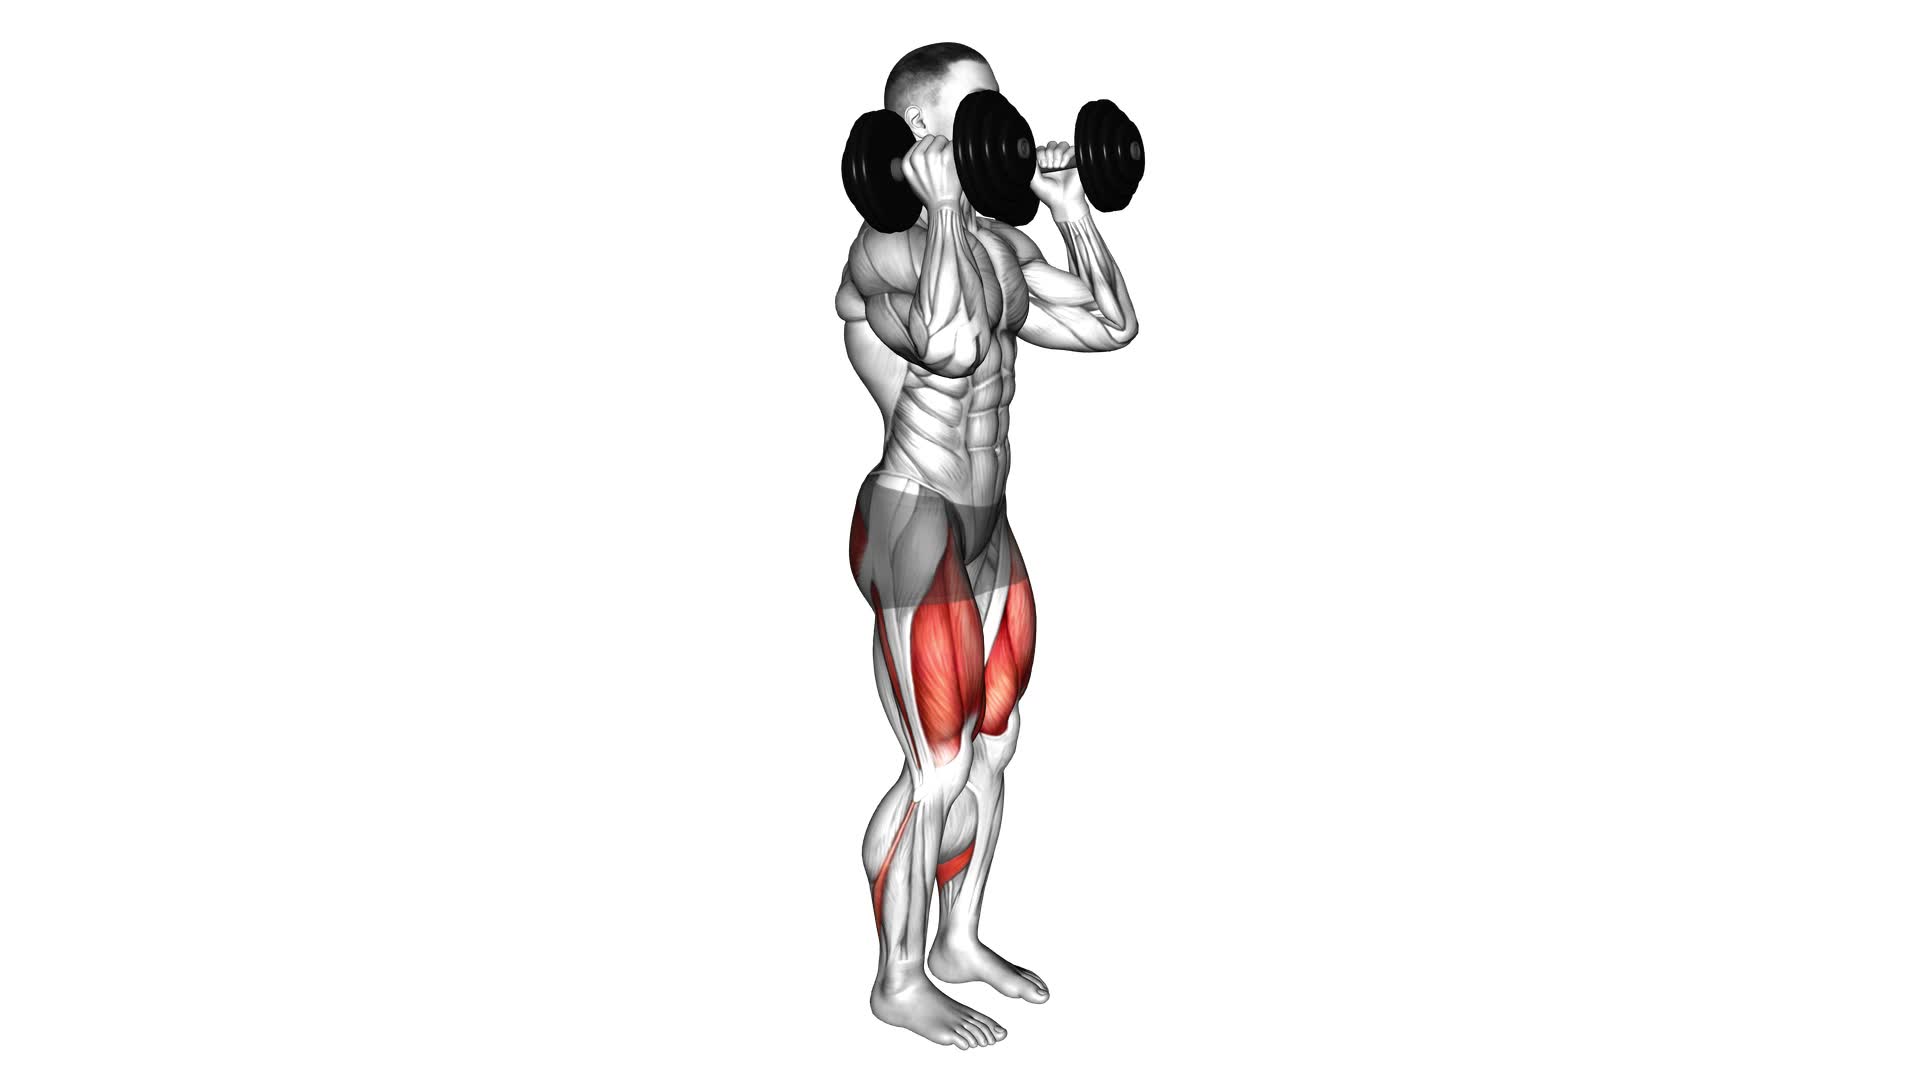 Dumbbell Kneeling Hold to Stand Clean Grip - Video Exercise Guide & Tips